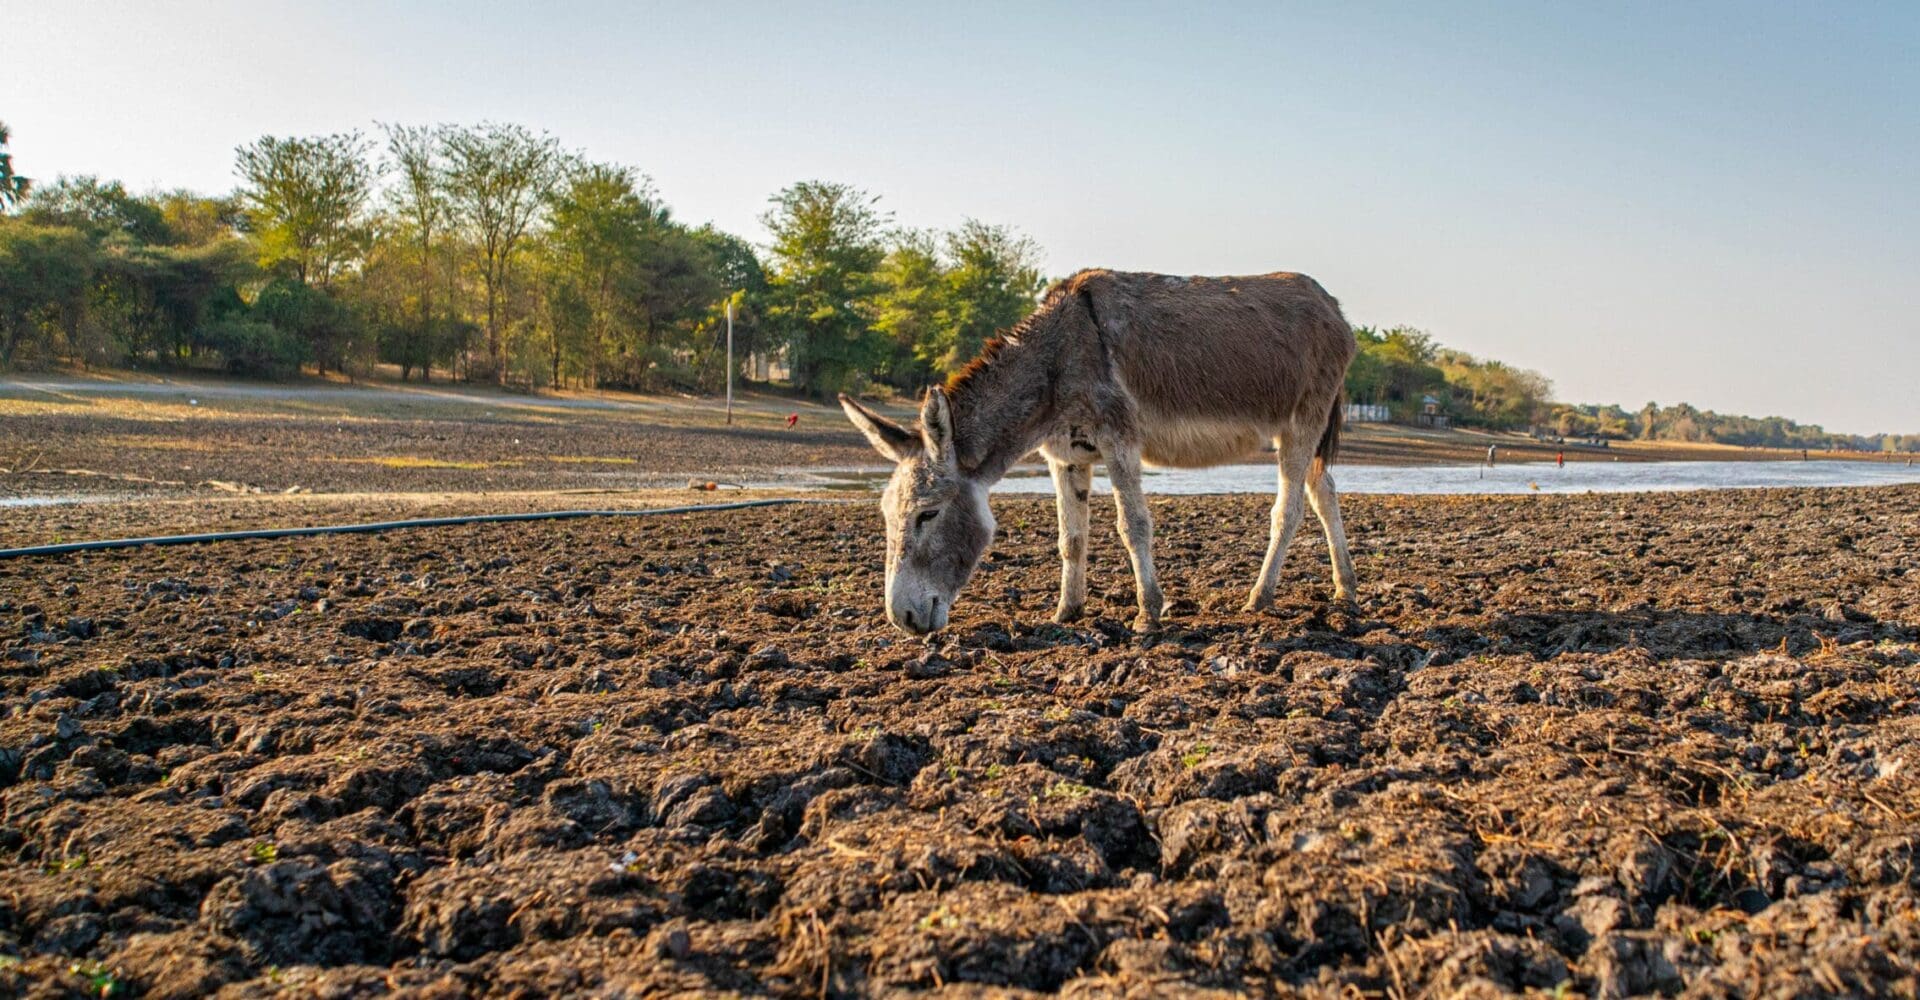 A working donkey grazes on a dry river bed.